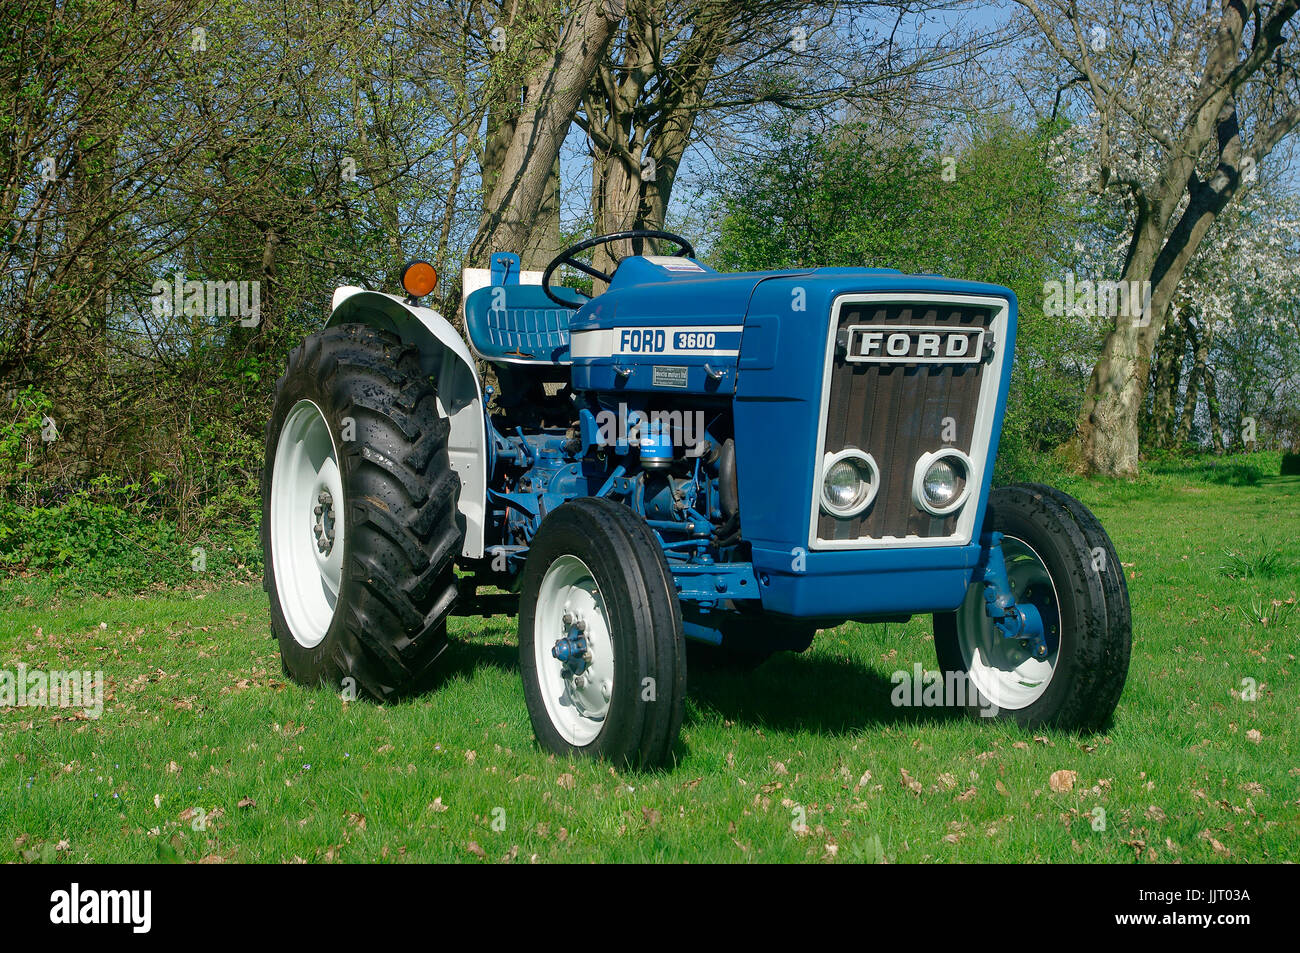 1981 Ford 3600 Orchard Tractor Stock Photo